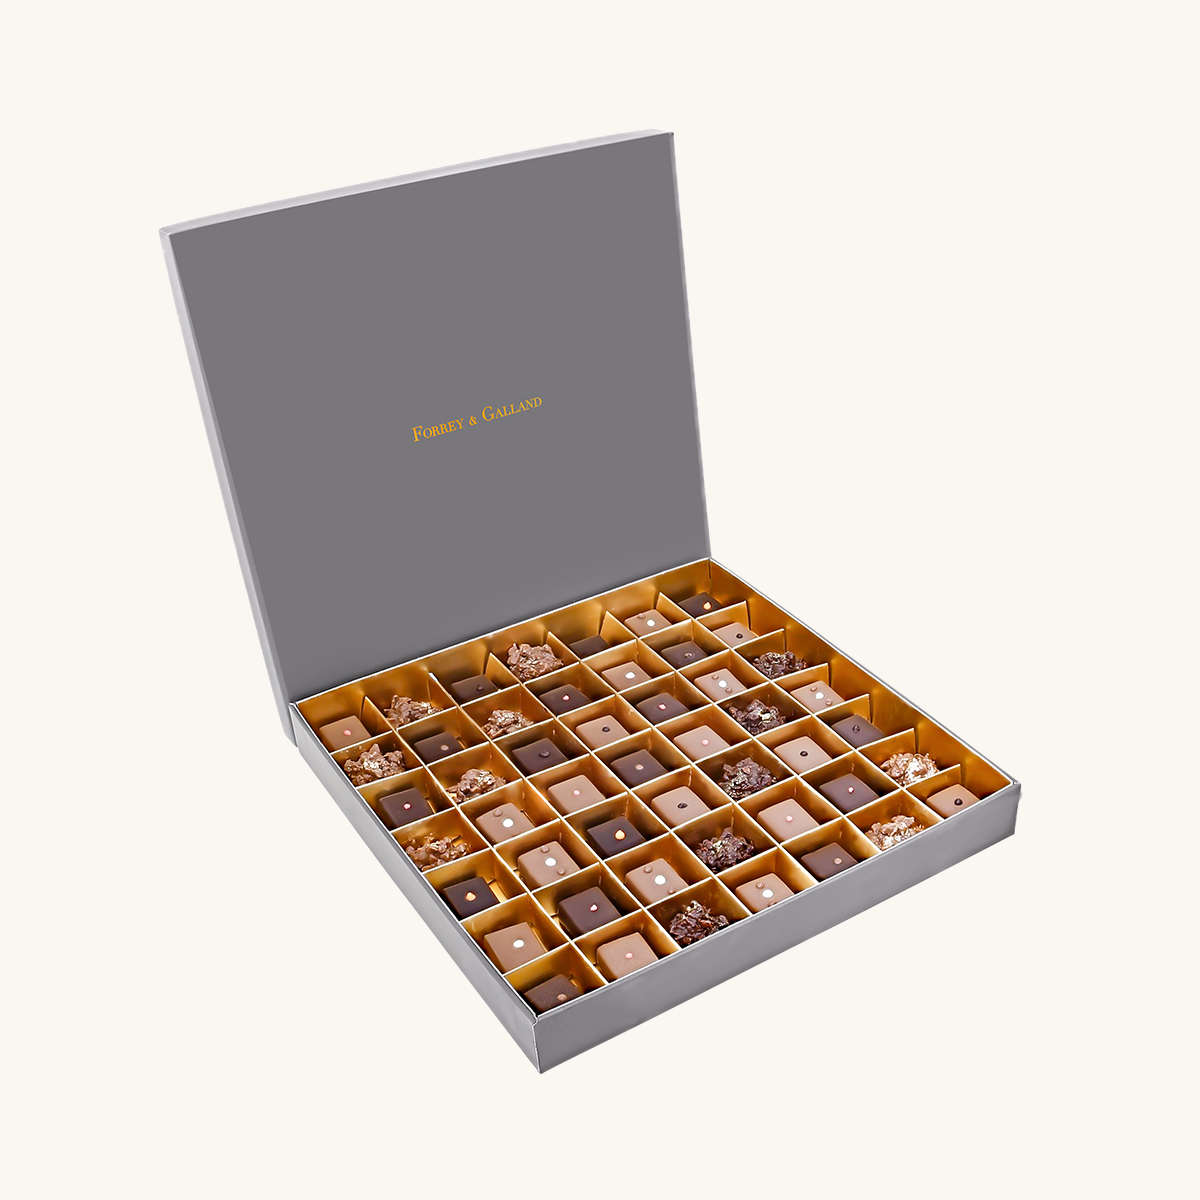 Forrey & Galland luxury chocolate box filled with 49 pieces of sugar free handmade chocolates.